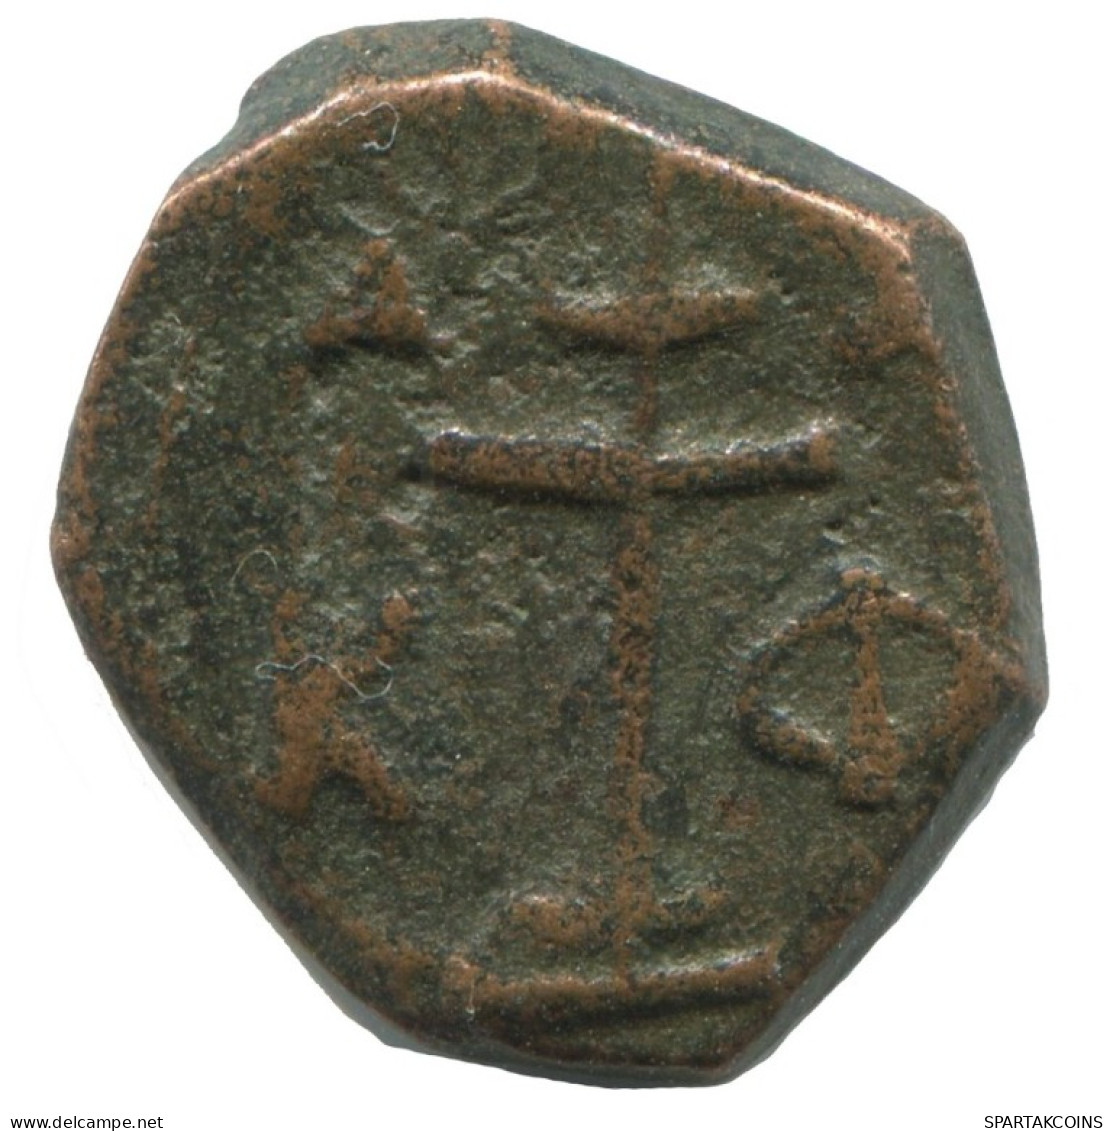 CRUSADER CROSS Authentic Original MEDIEVAL EUROPEAN Coin 1.3g/15mm #AC233.8.E.A - Other - Europe